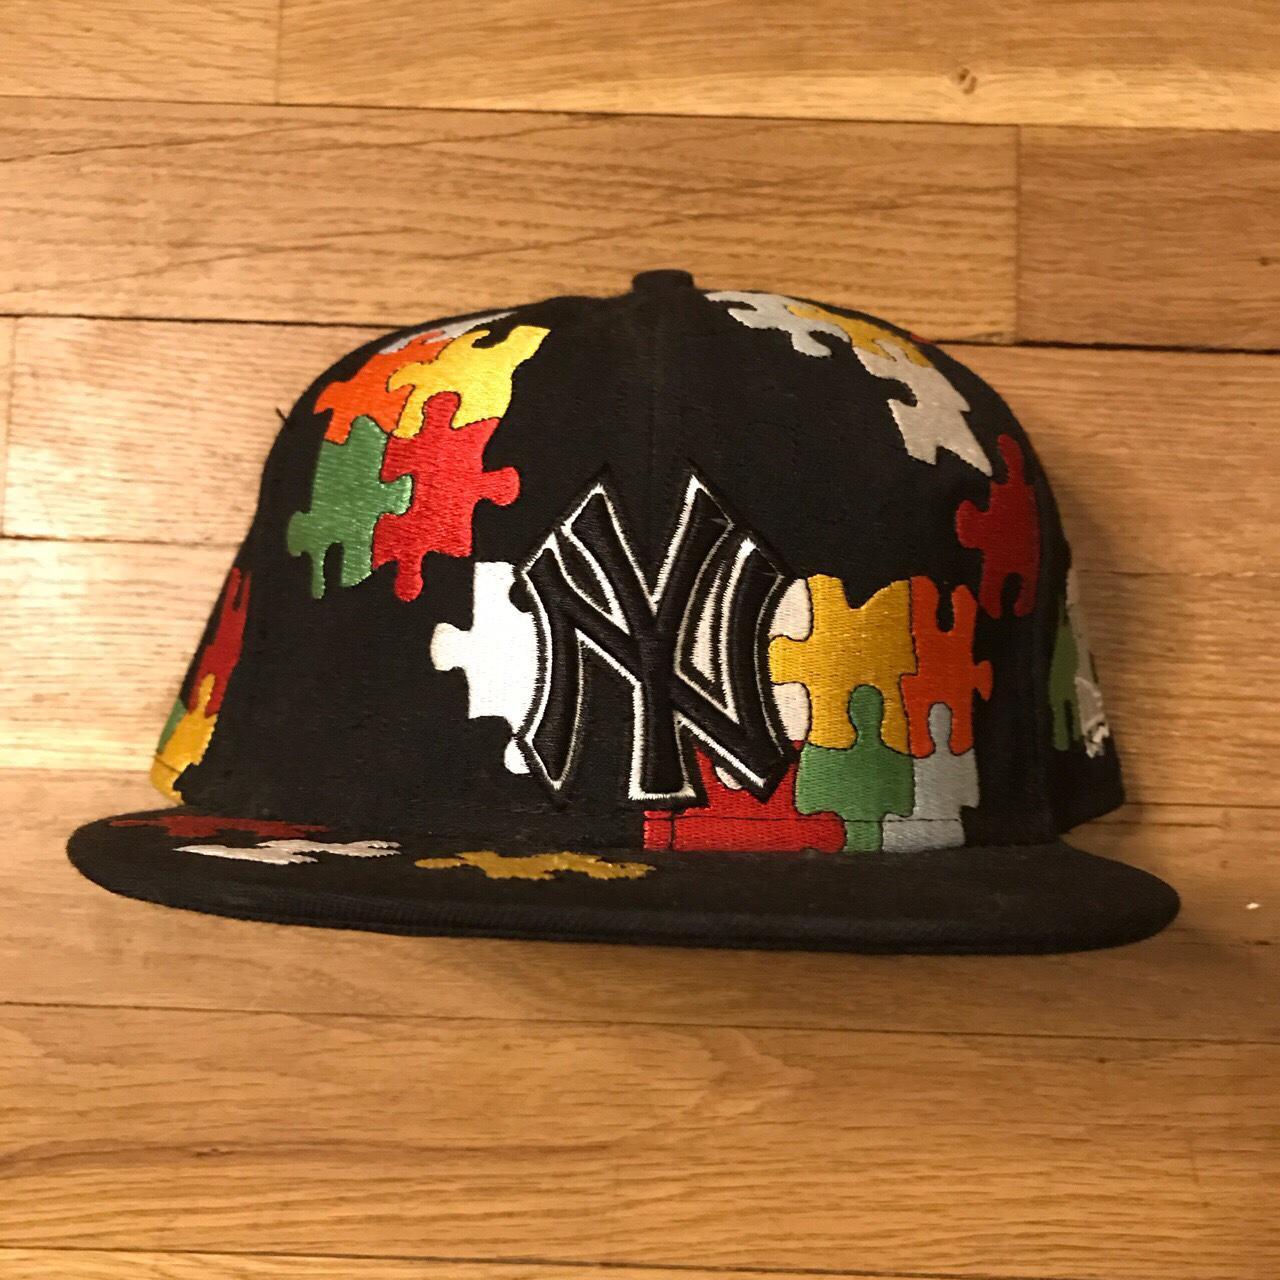 New Era Fitted Hat $5.75 shipping 7 5/8 New York... - Depop